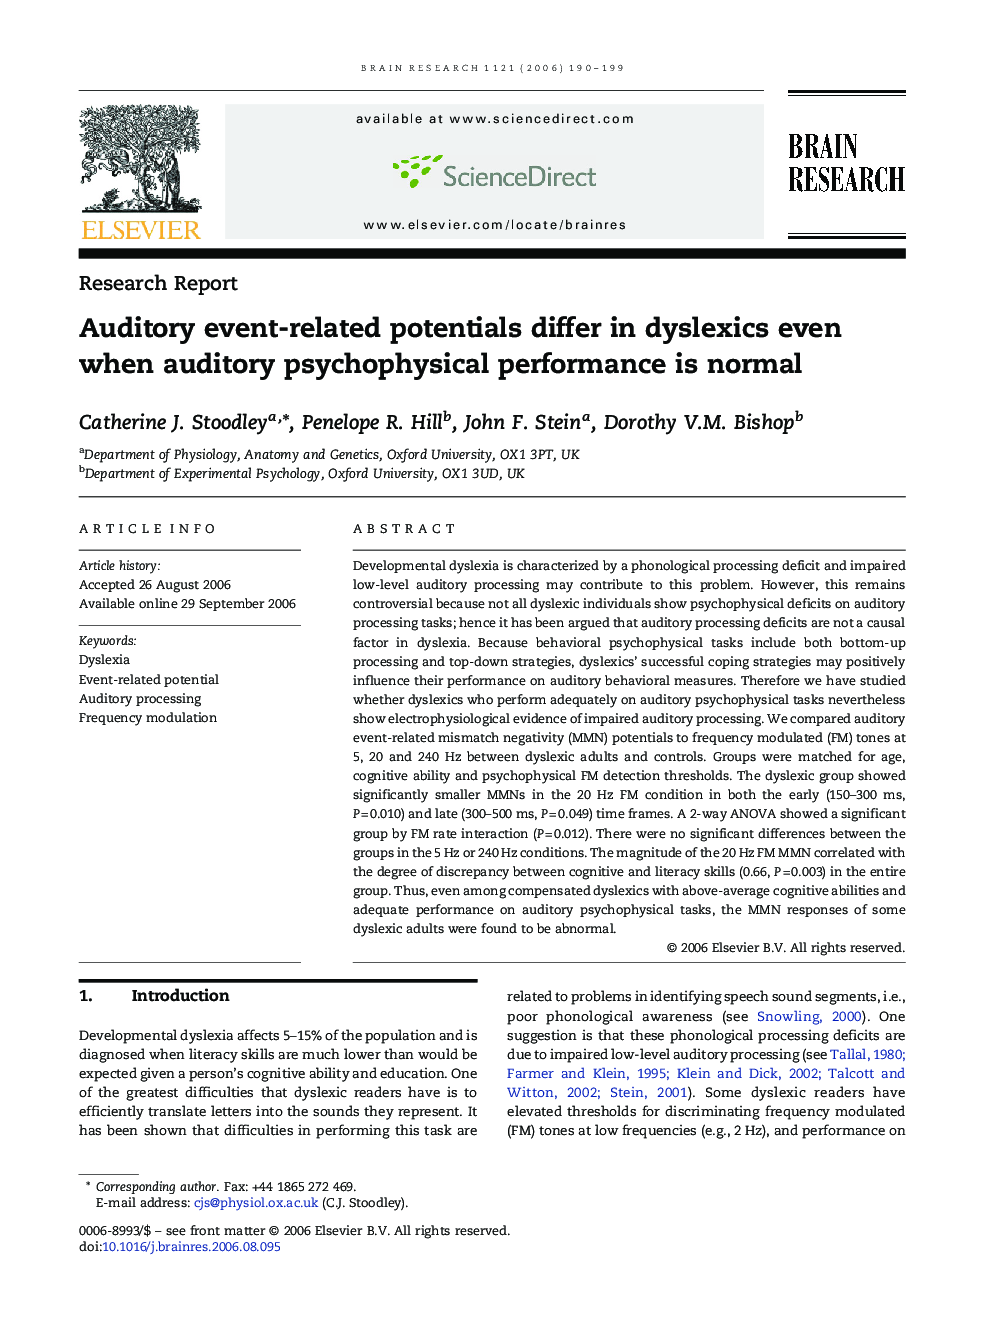 Auditory event-related potentials differ in dyslexics even when auditory psychophysical performance is normal